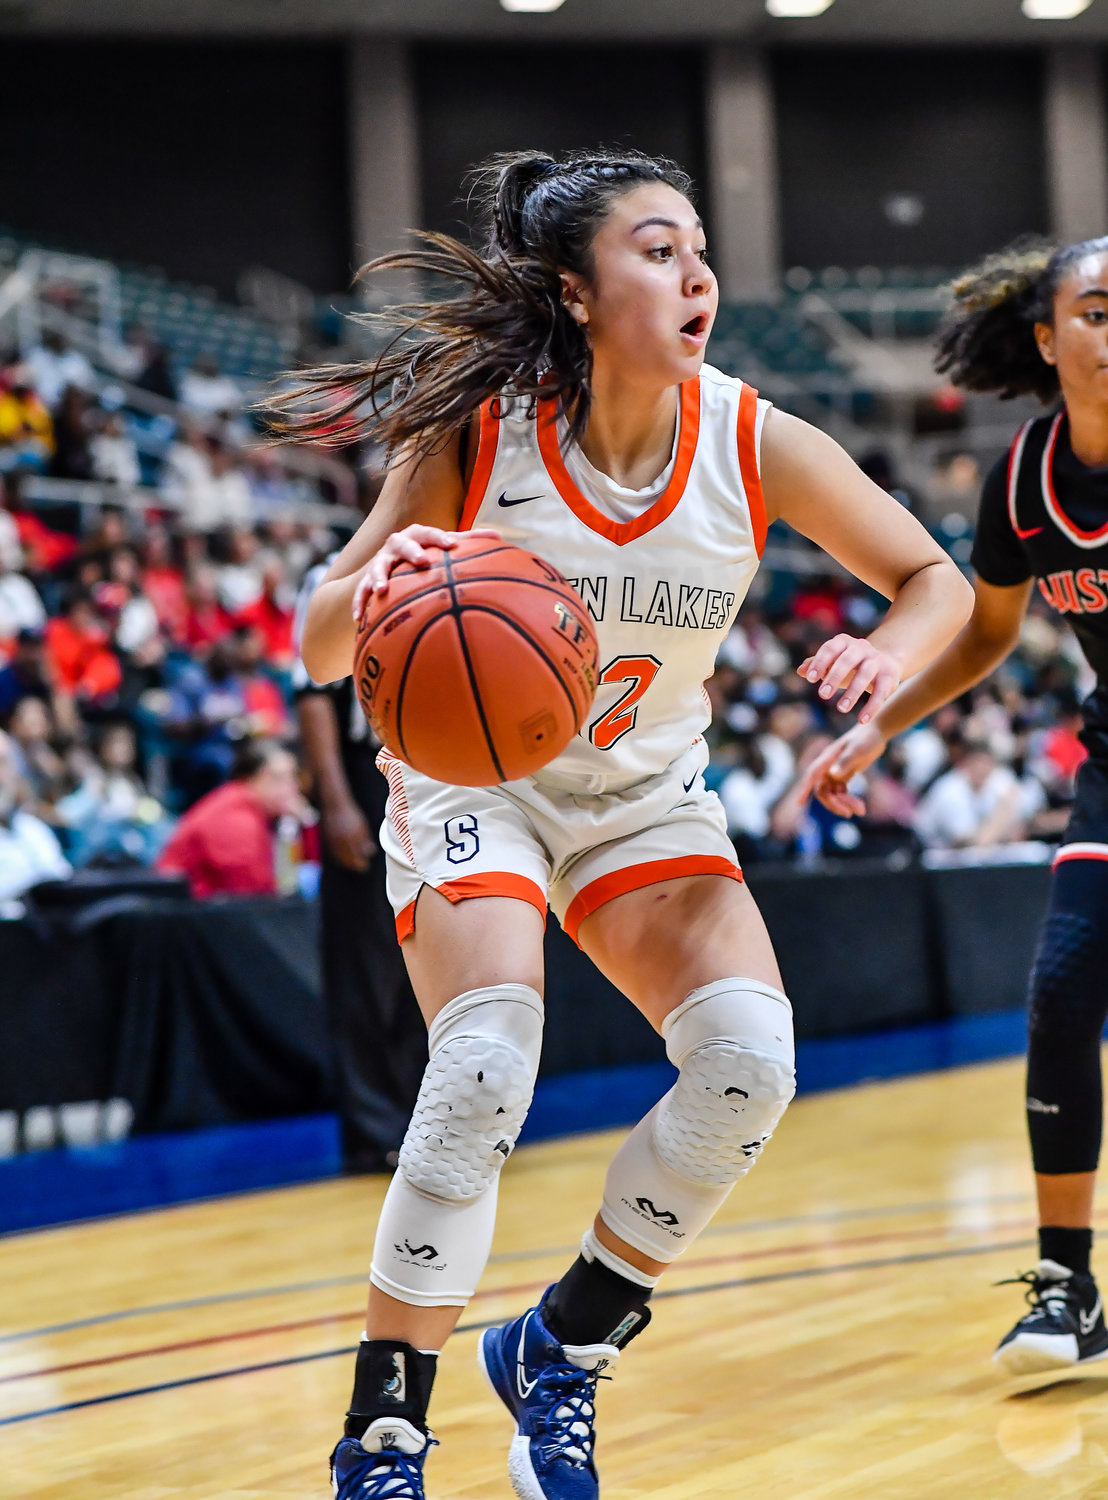 Katy Tx. Feb 22, 2022:  Seven Lakes Cailyn Tucker #12 drives the baseline during the Regional Quarterfinal playoff game, Seven Lakes vs Fort Bend Austin at the Merrell Center. (Photo by Mark Goodman / Katy Times)